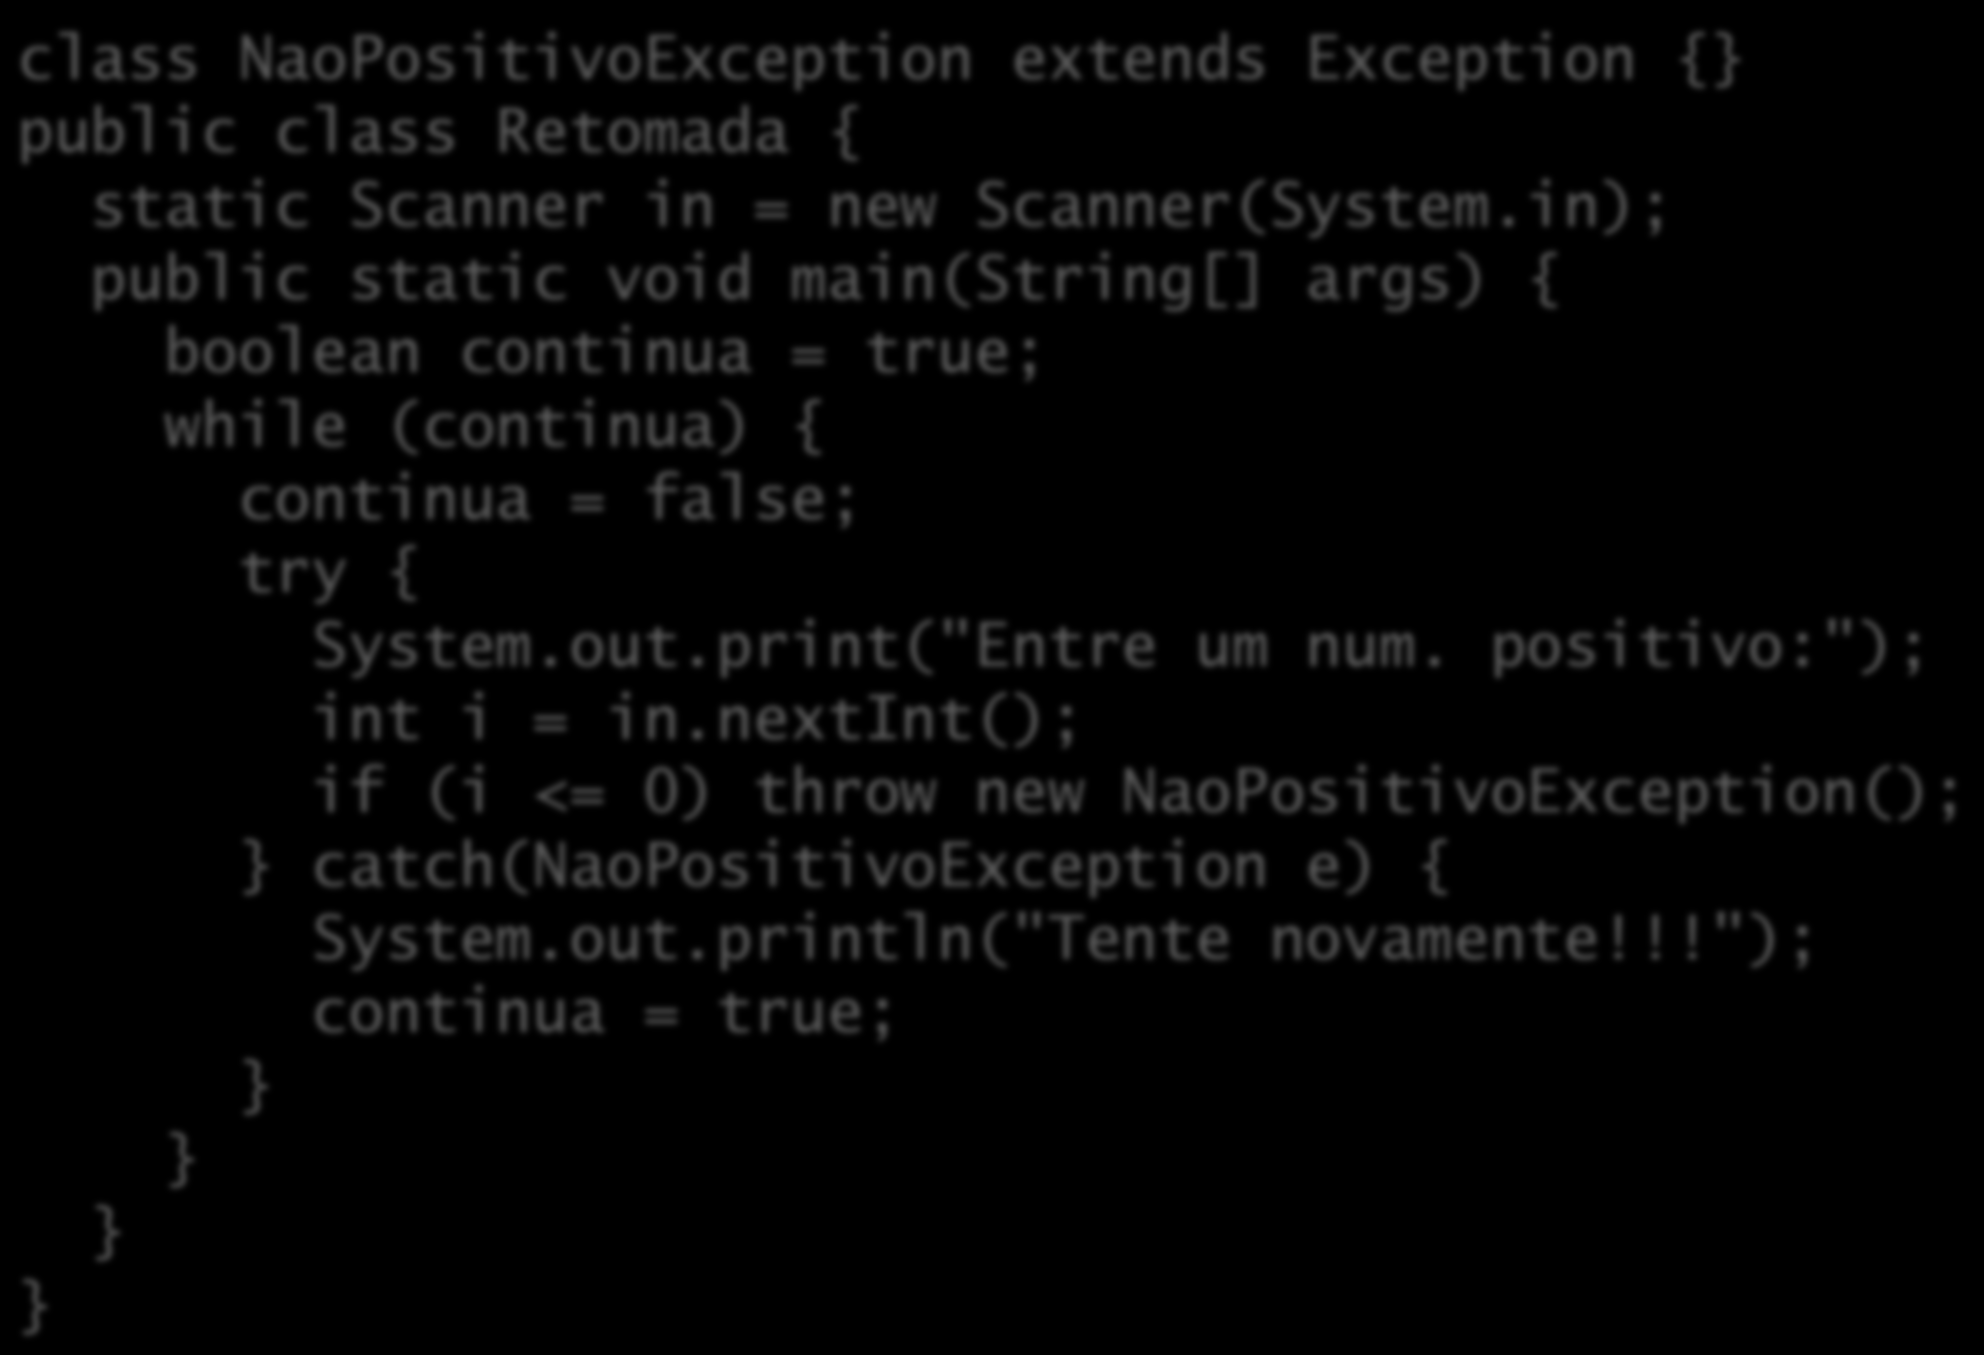 Retomada class NaoPositivoException extends Exception { public class Retomada { static Scanner in = new Scanner(System.